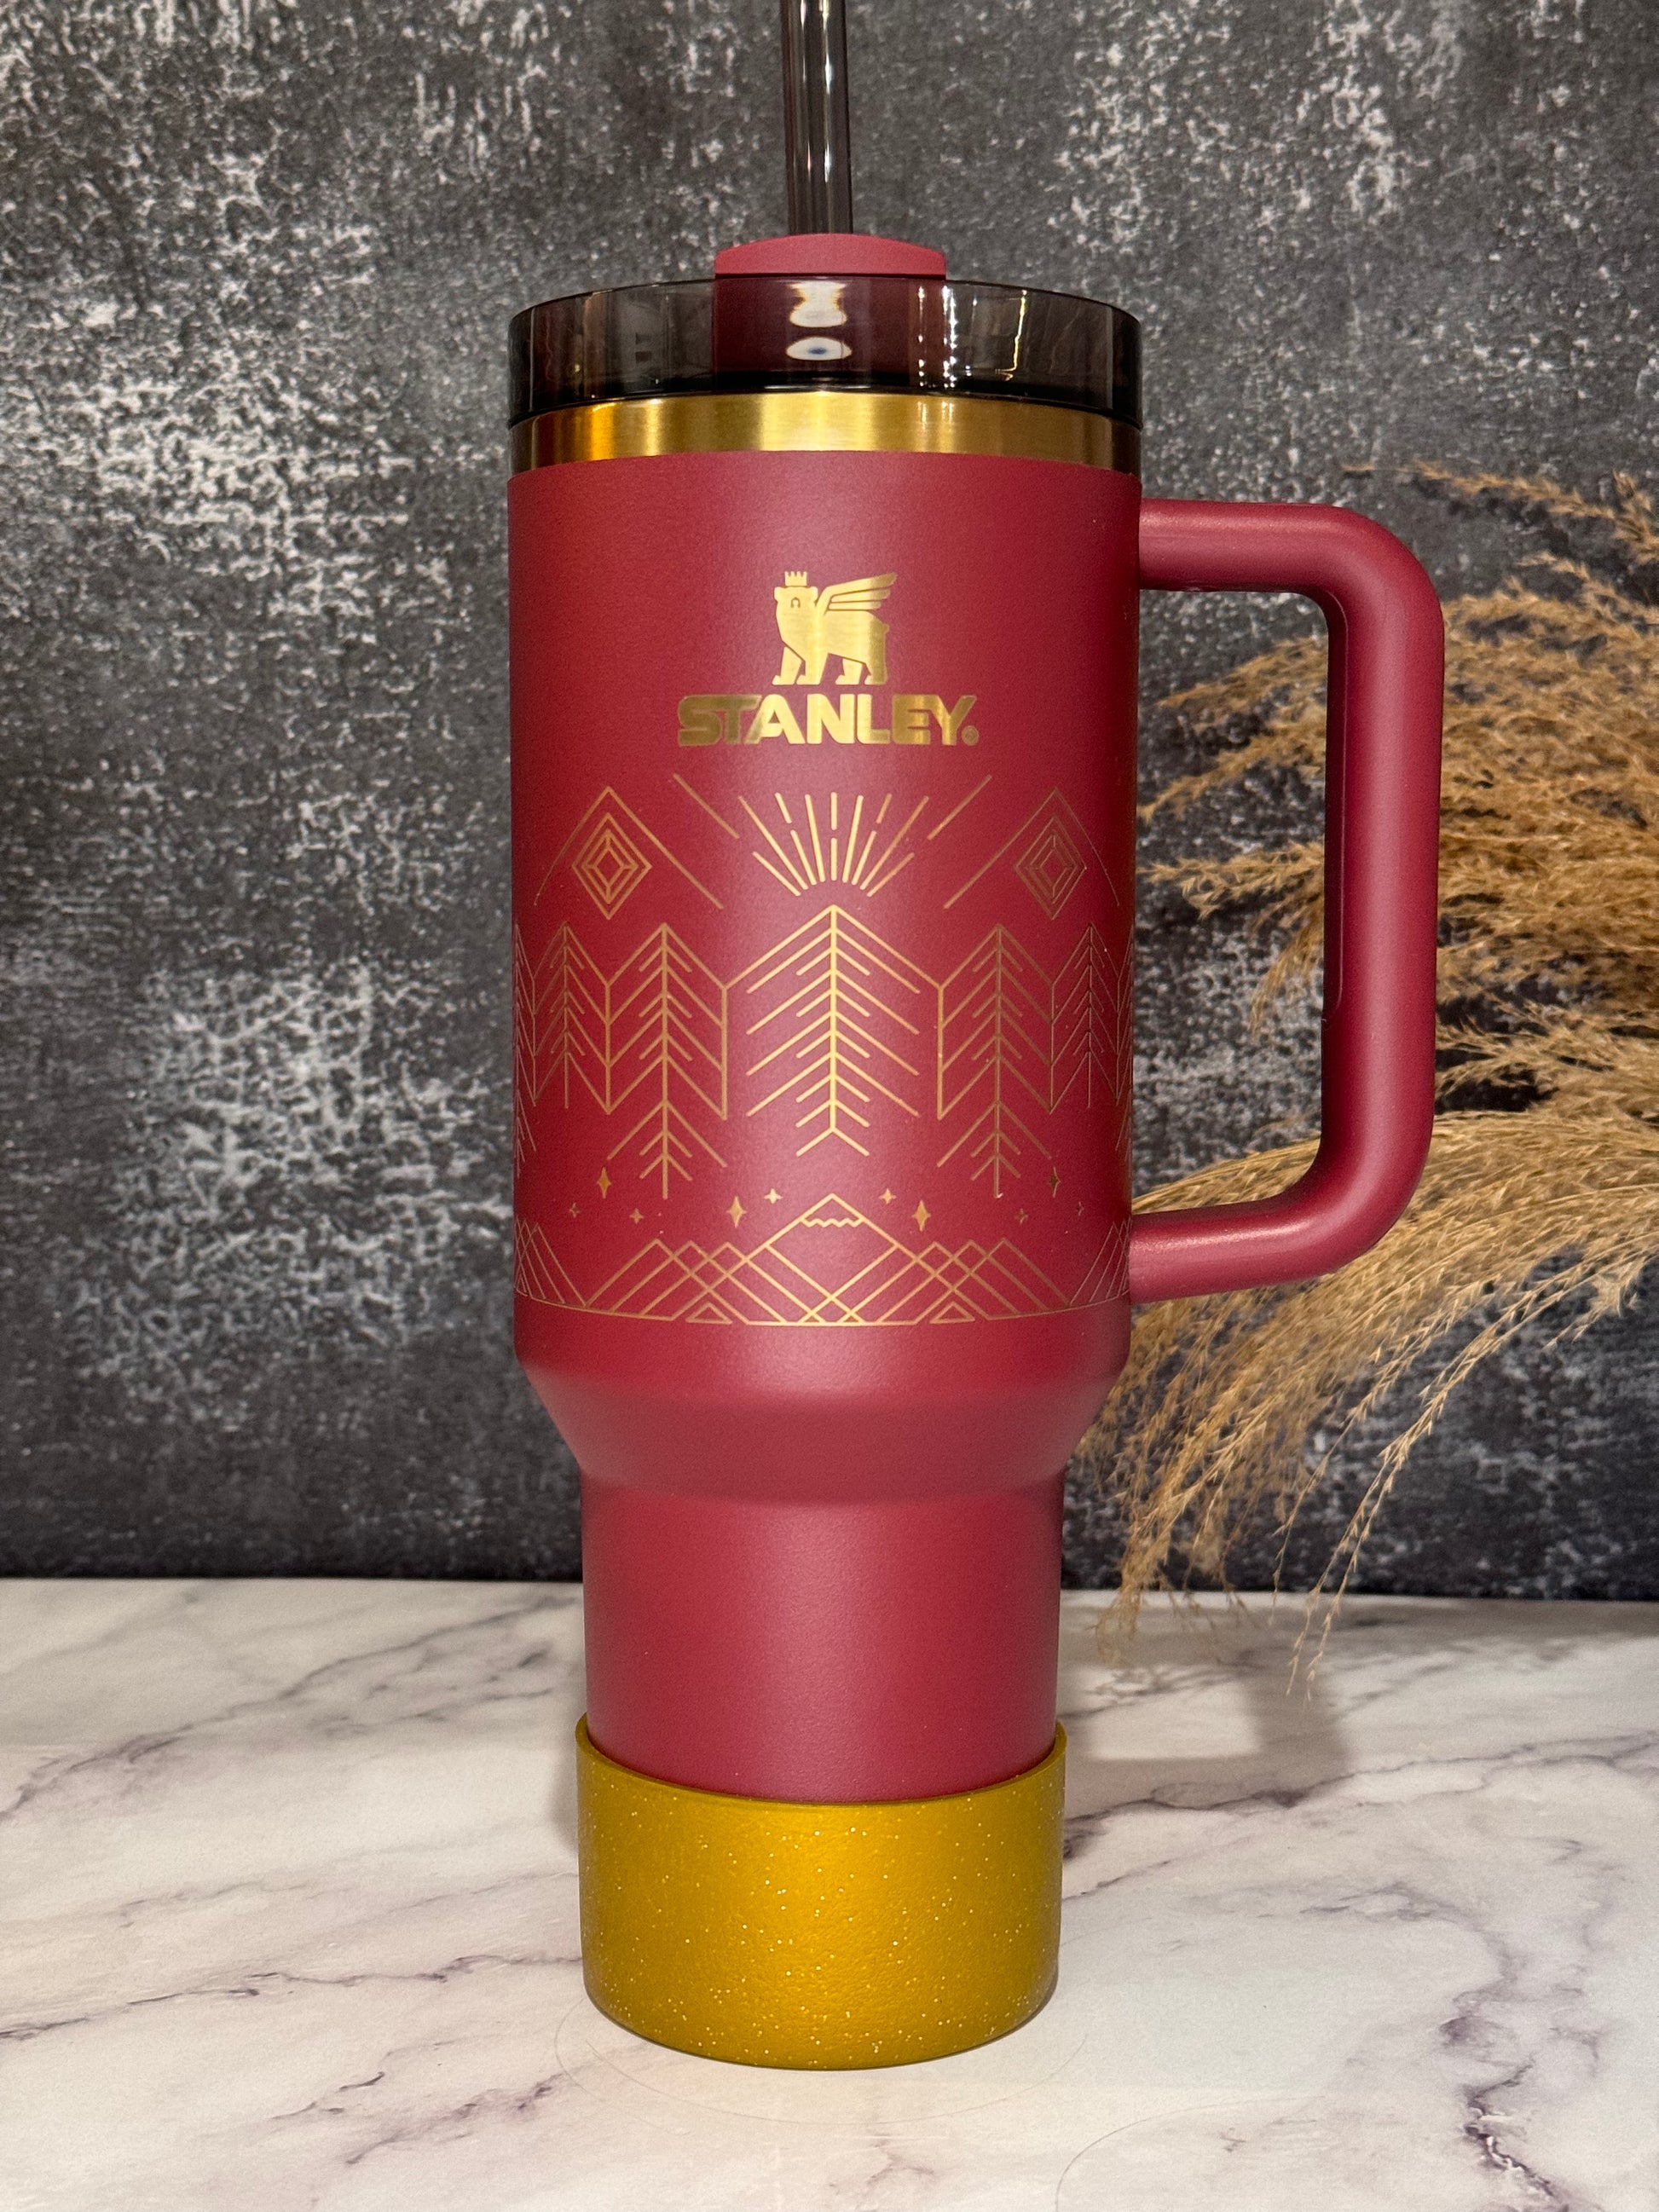 Red Glitter Stanley Cup Boot for Stanley 40 Oz Tumbler Stanley Cup